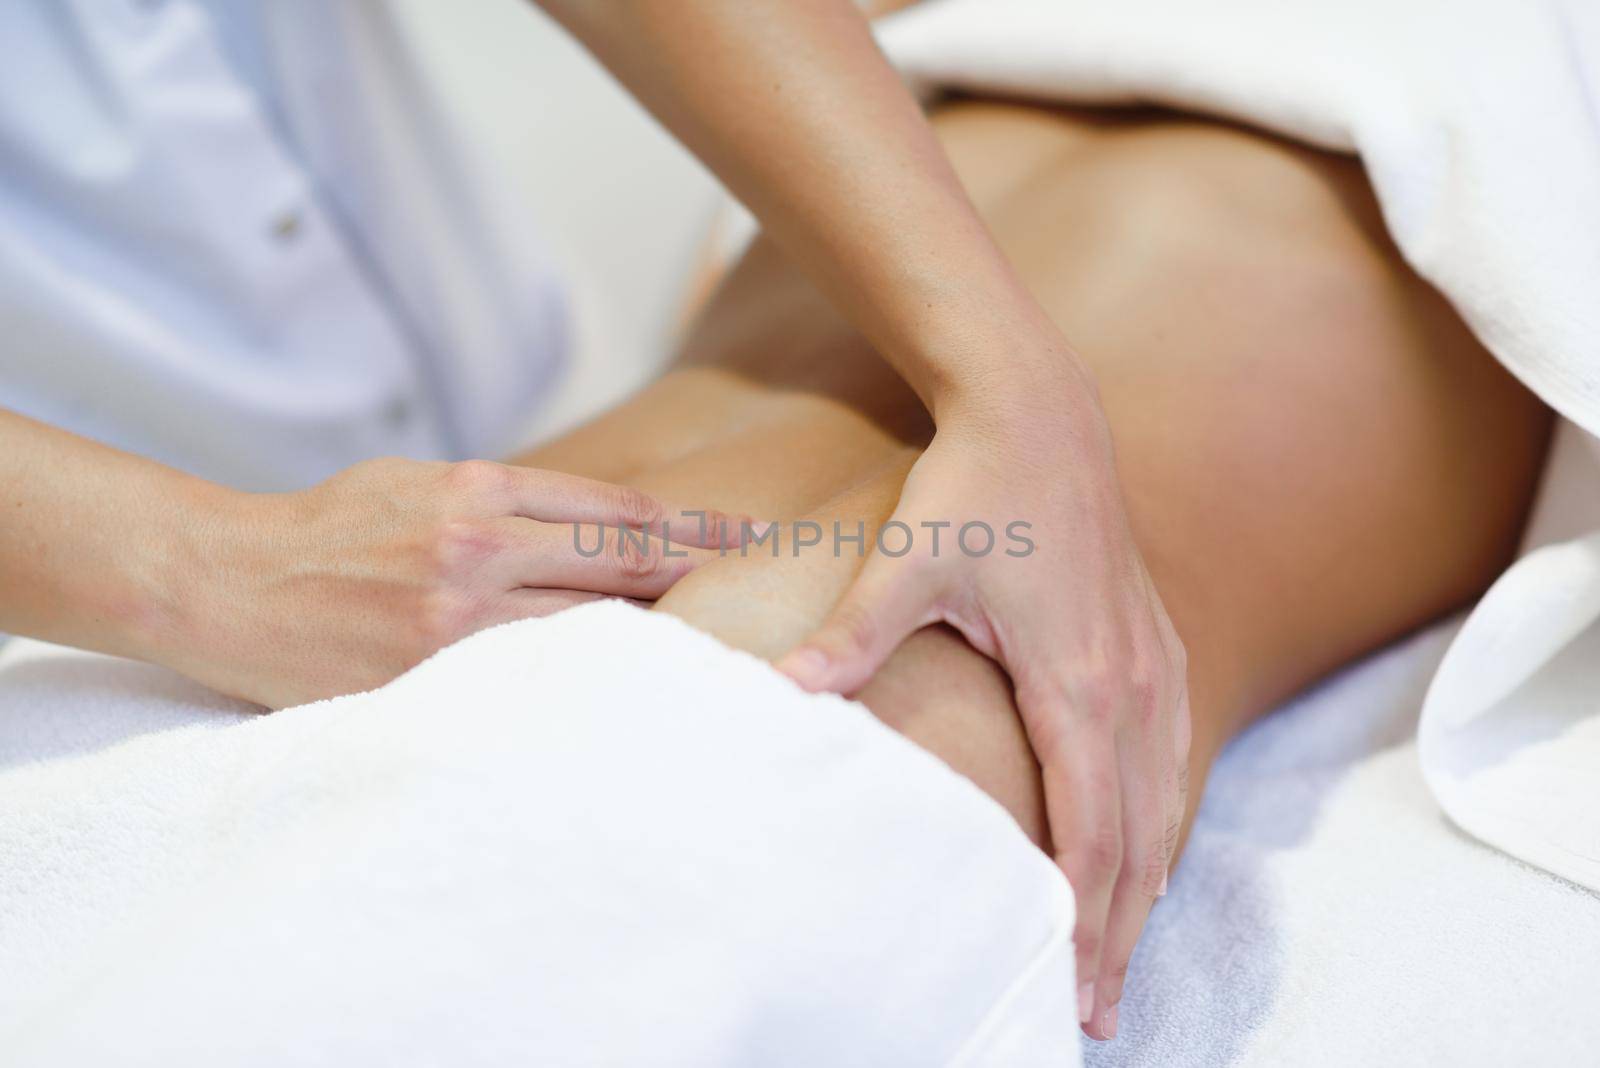 Woman receiving a belly massage at spa salon by javiindy